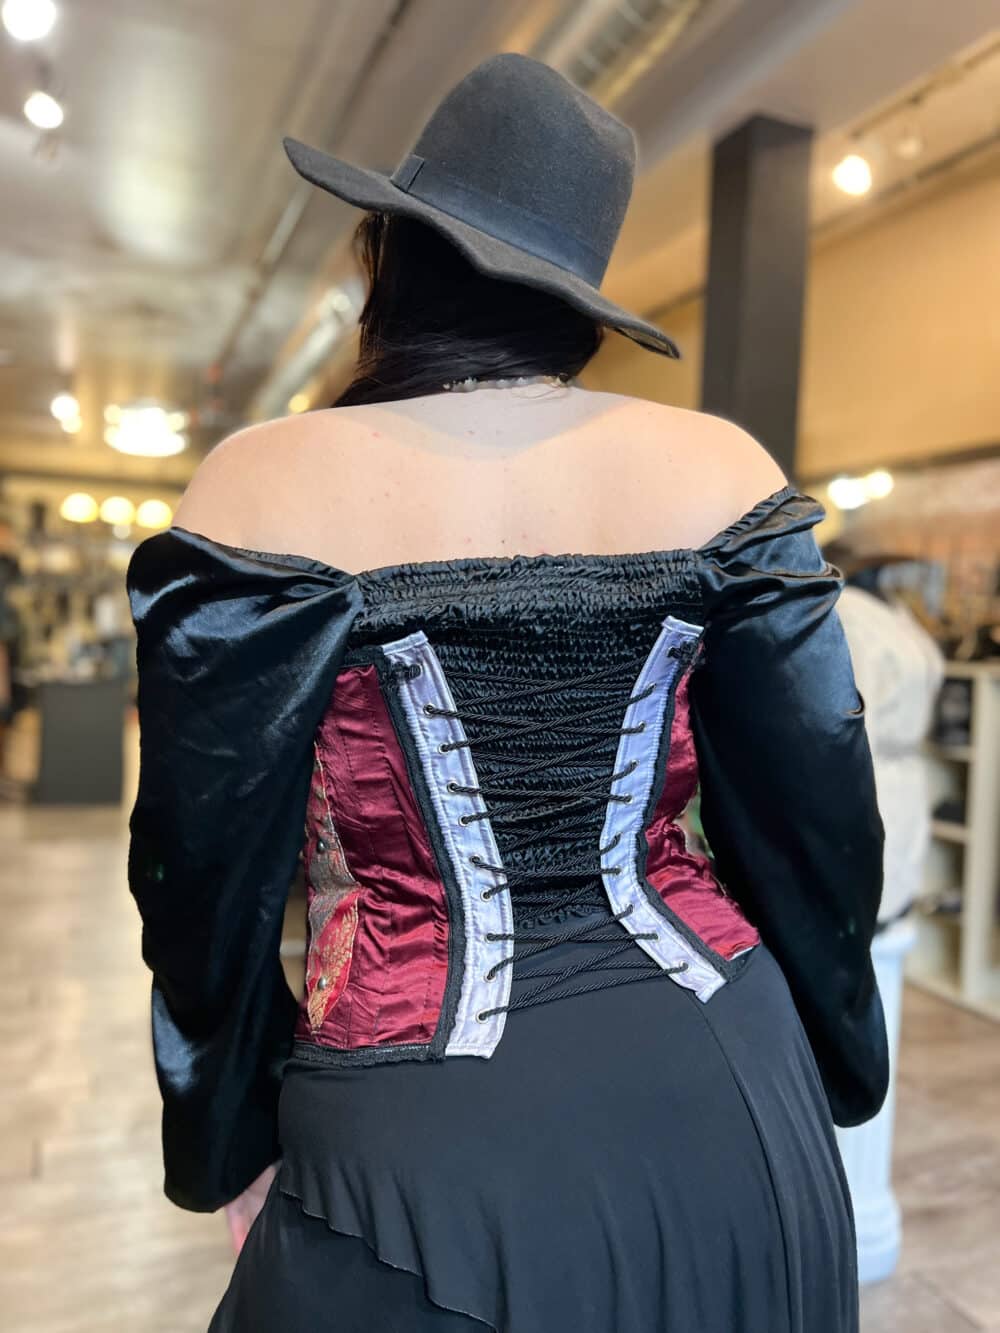 A Crimson textile renaissance bustier with paisley accents & black lace trim. Black Chord is the corset in back that helps cinch.